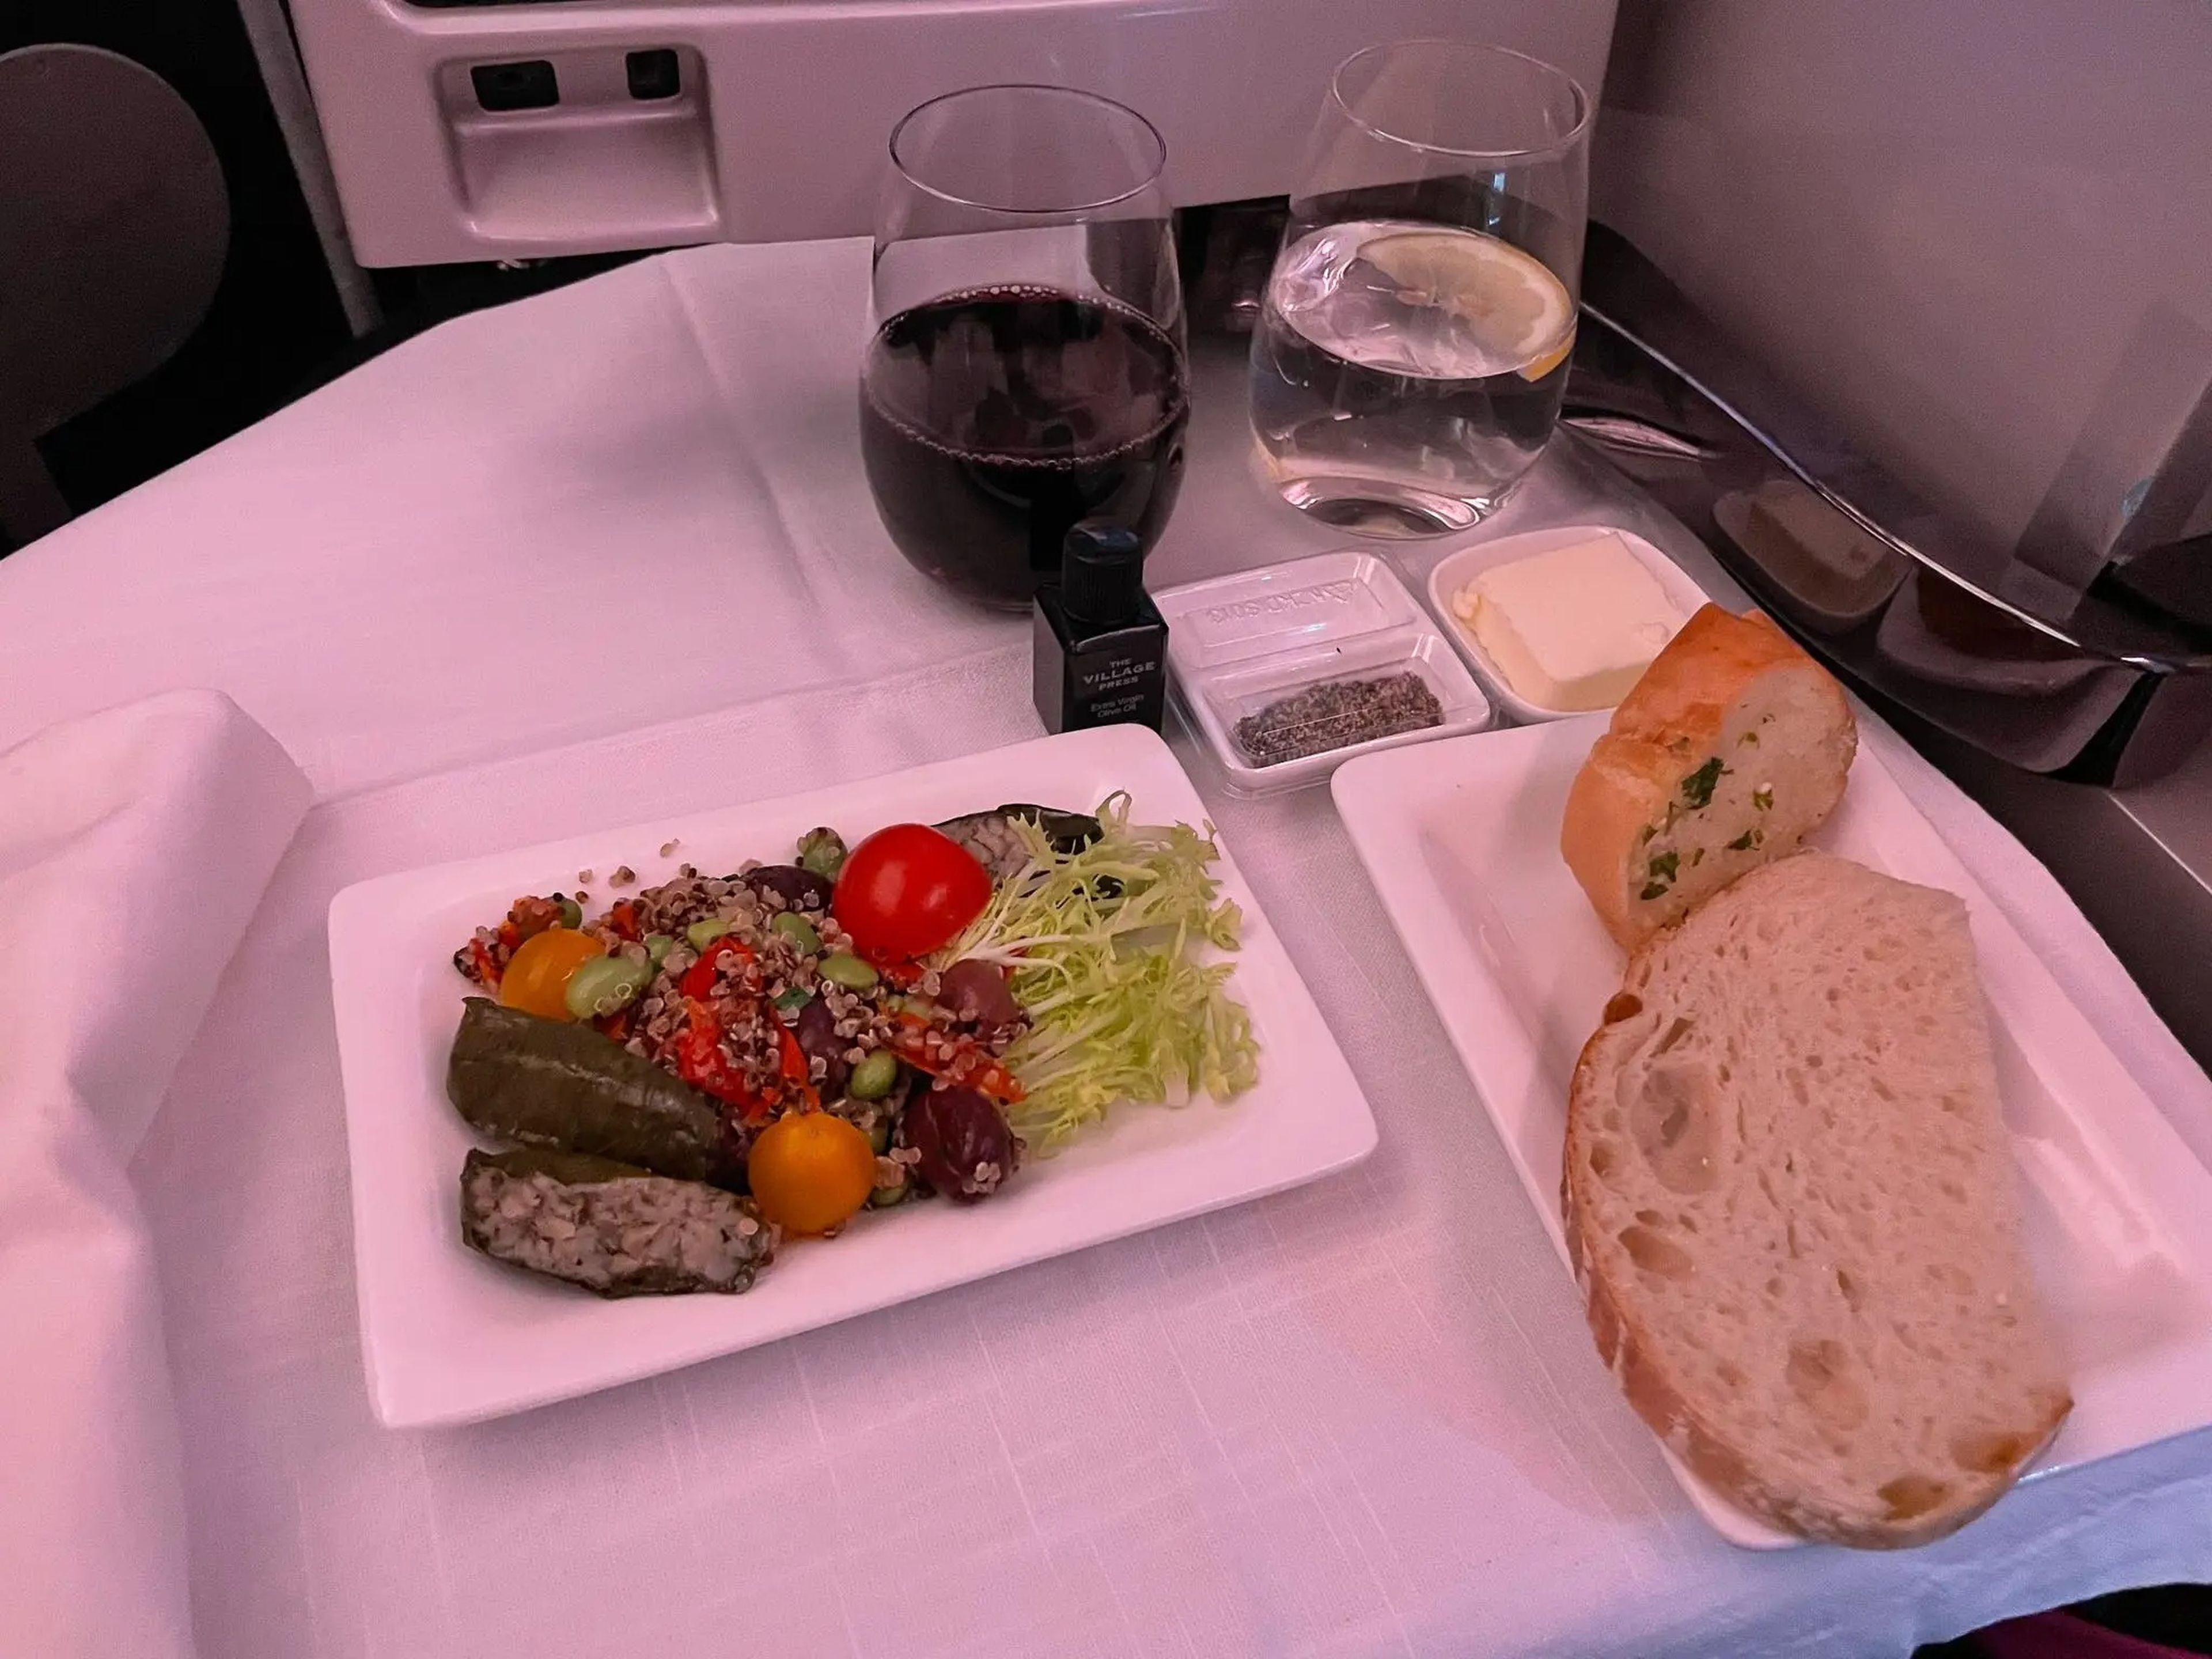 The author's first-course on her Air New Zealand flight.